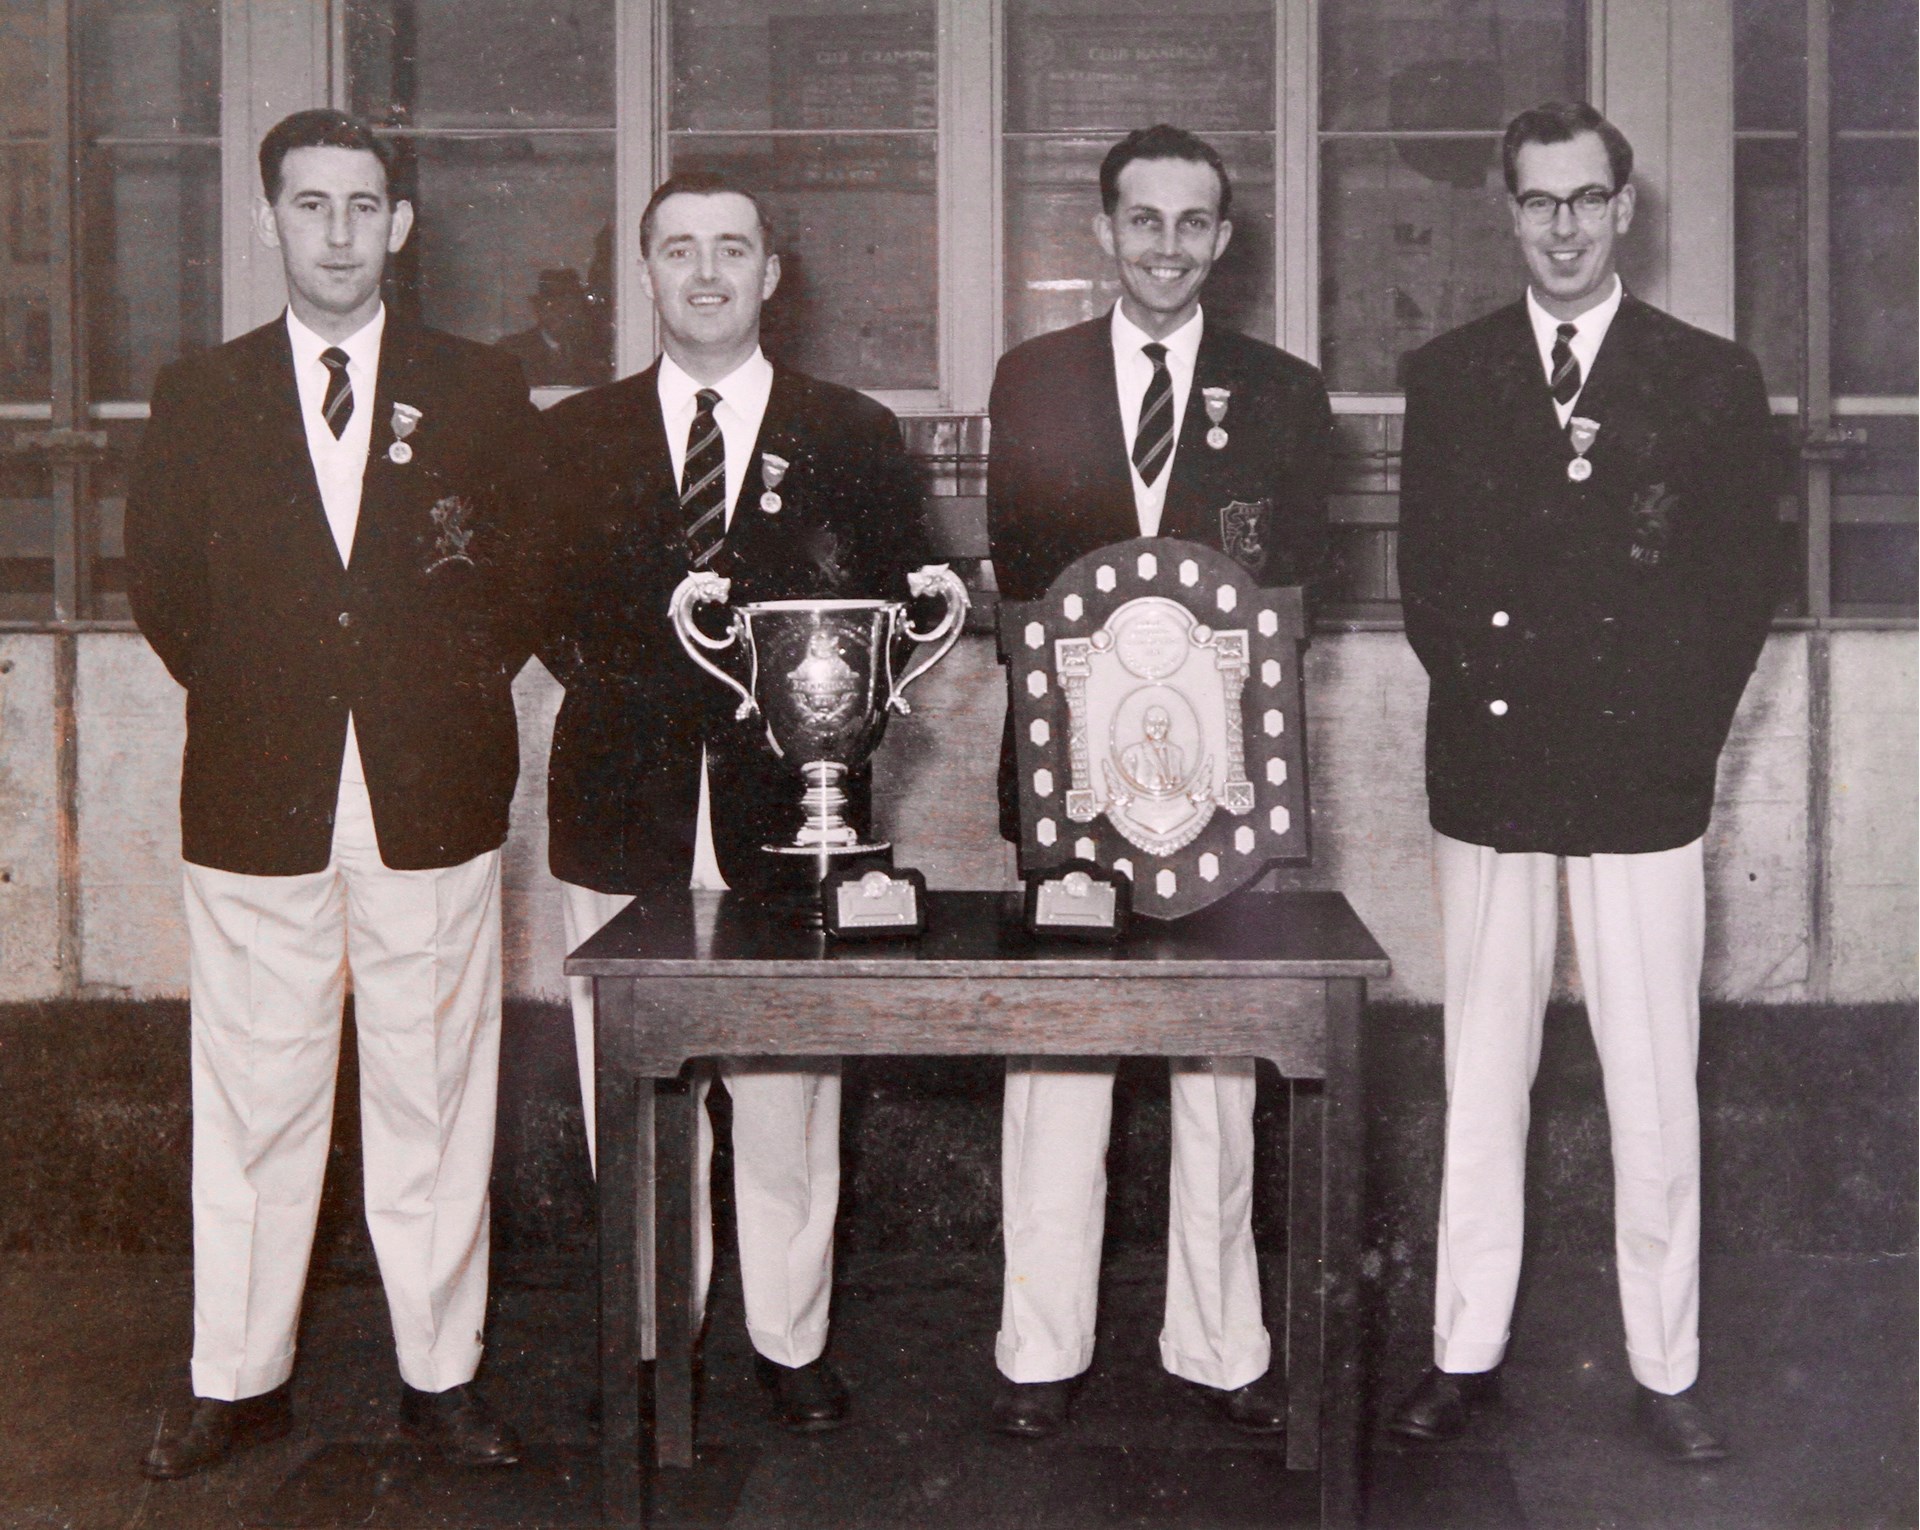 British Isles and Welsh Fours Winners 1963     From left to right: G Humphries, R. Thomas, J.A. Morgan & J.R. Evans